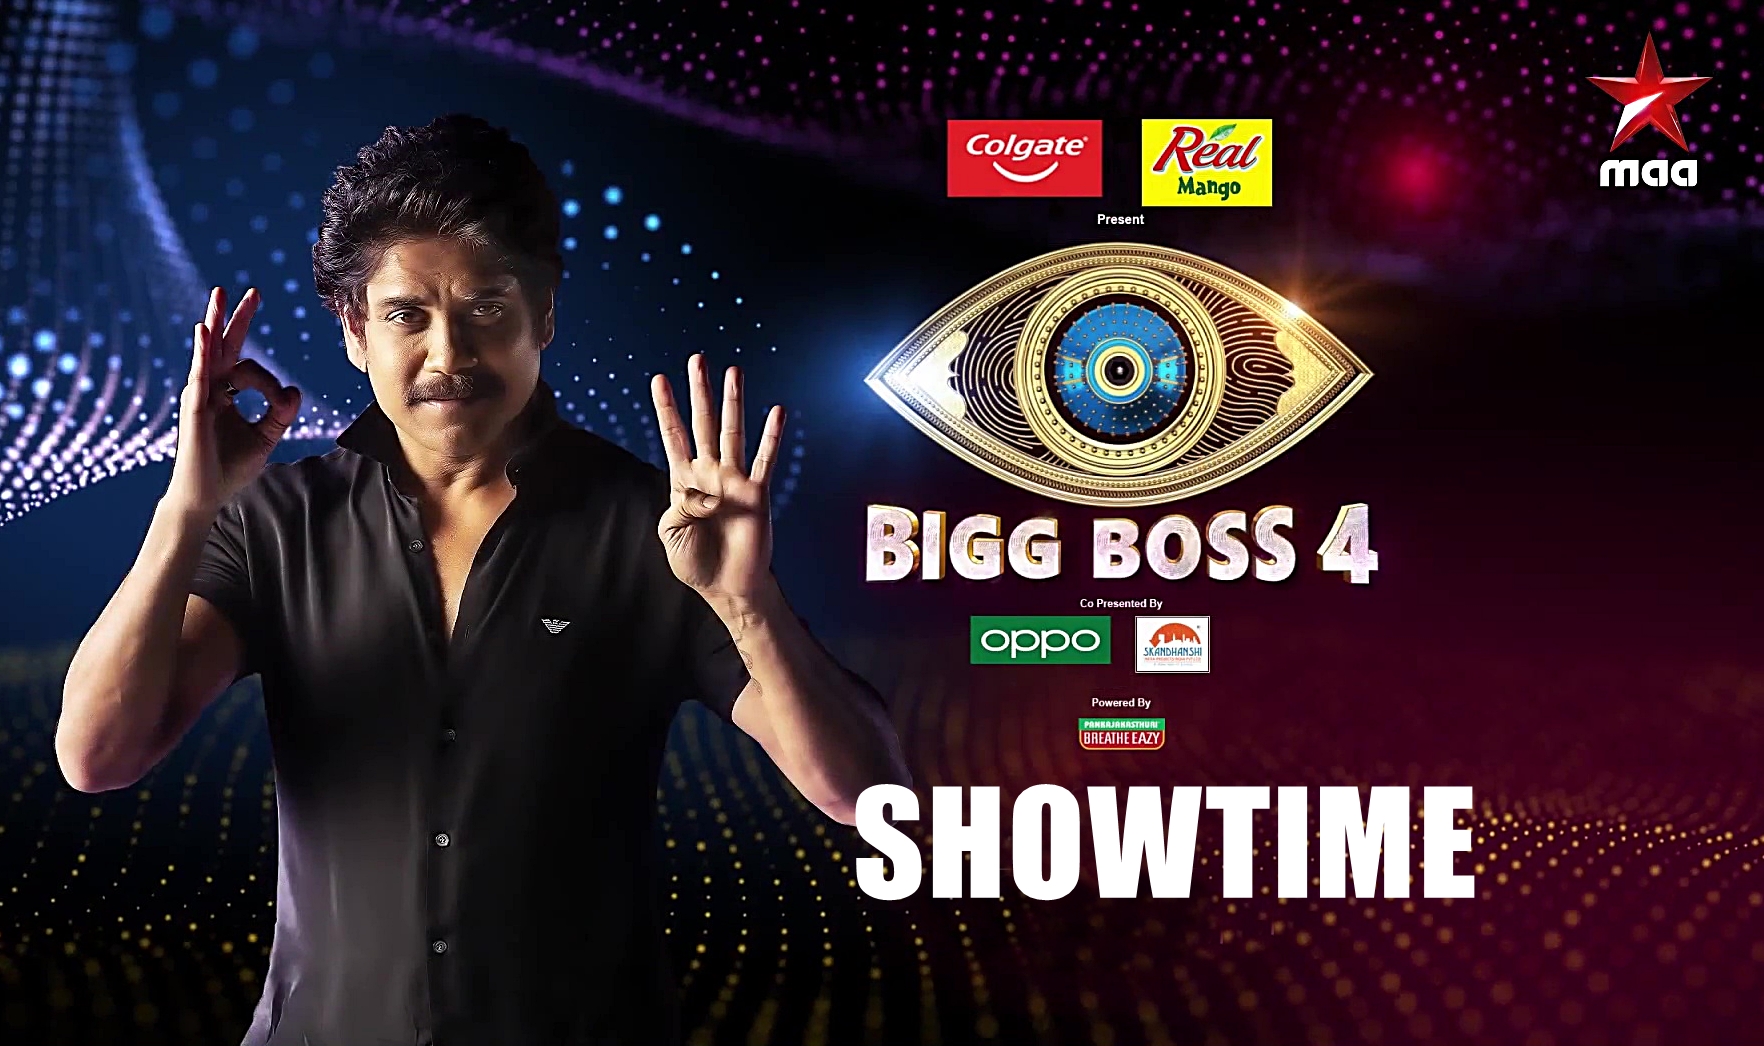 Bigg Boss Telugu 4 Voting - How To Vote For Your Favorite Contestant? | Voting Via Hotstar App & Missed Call